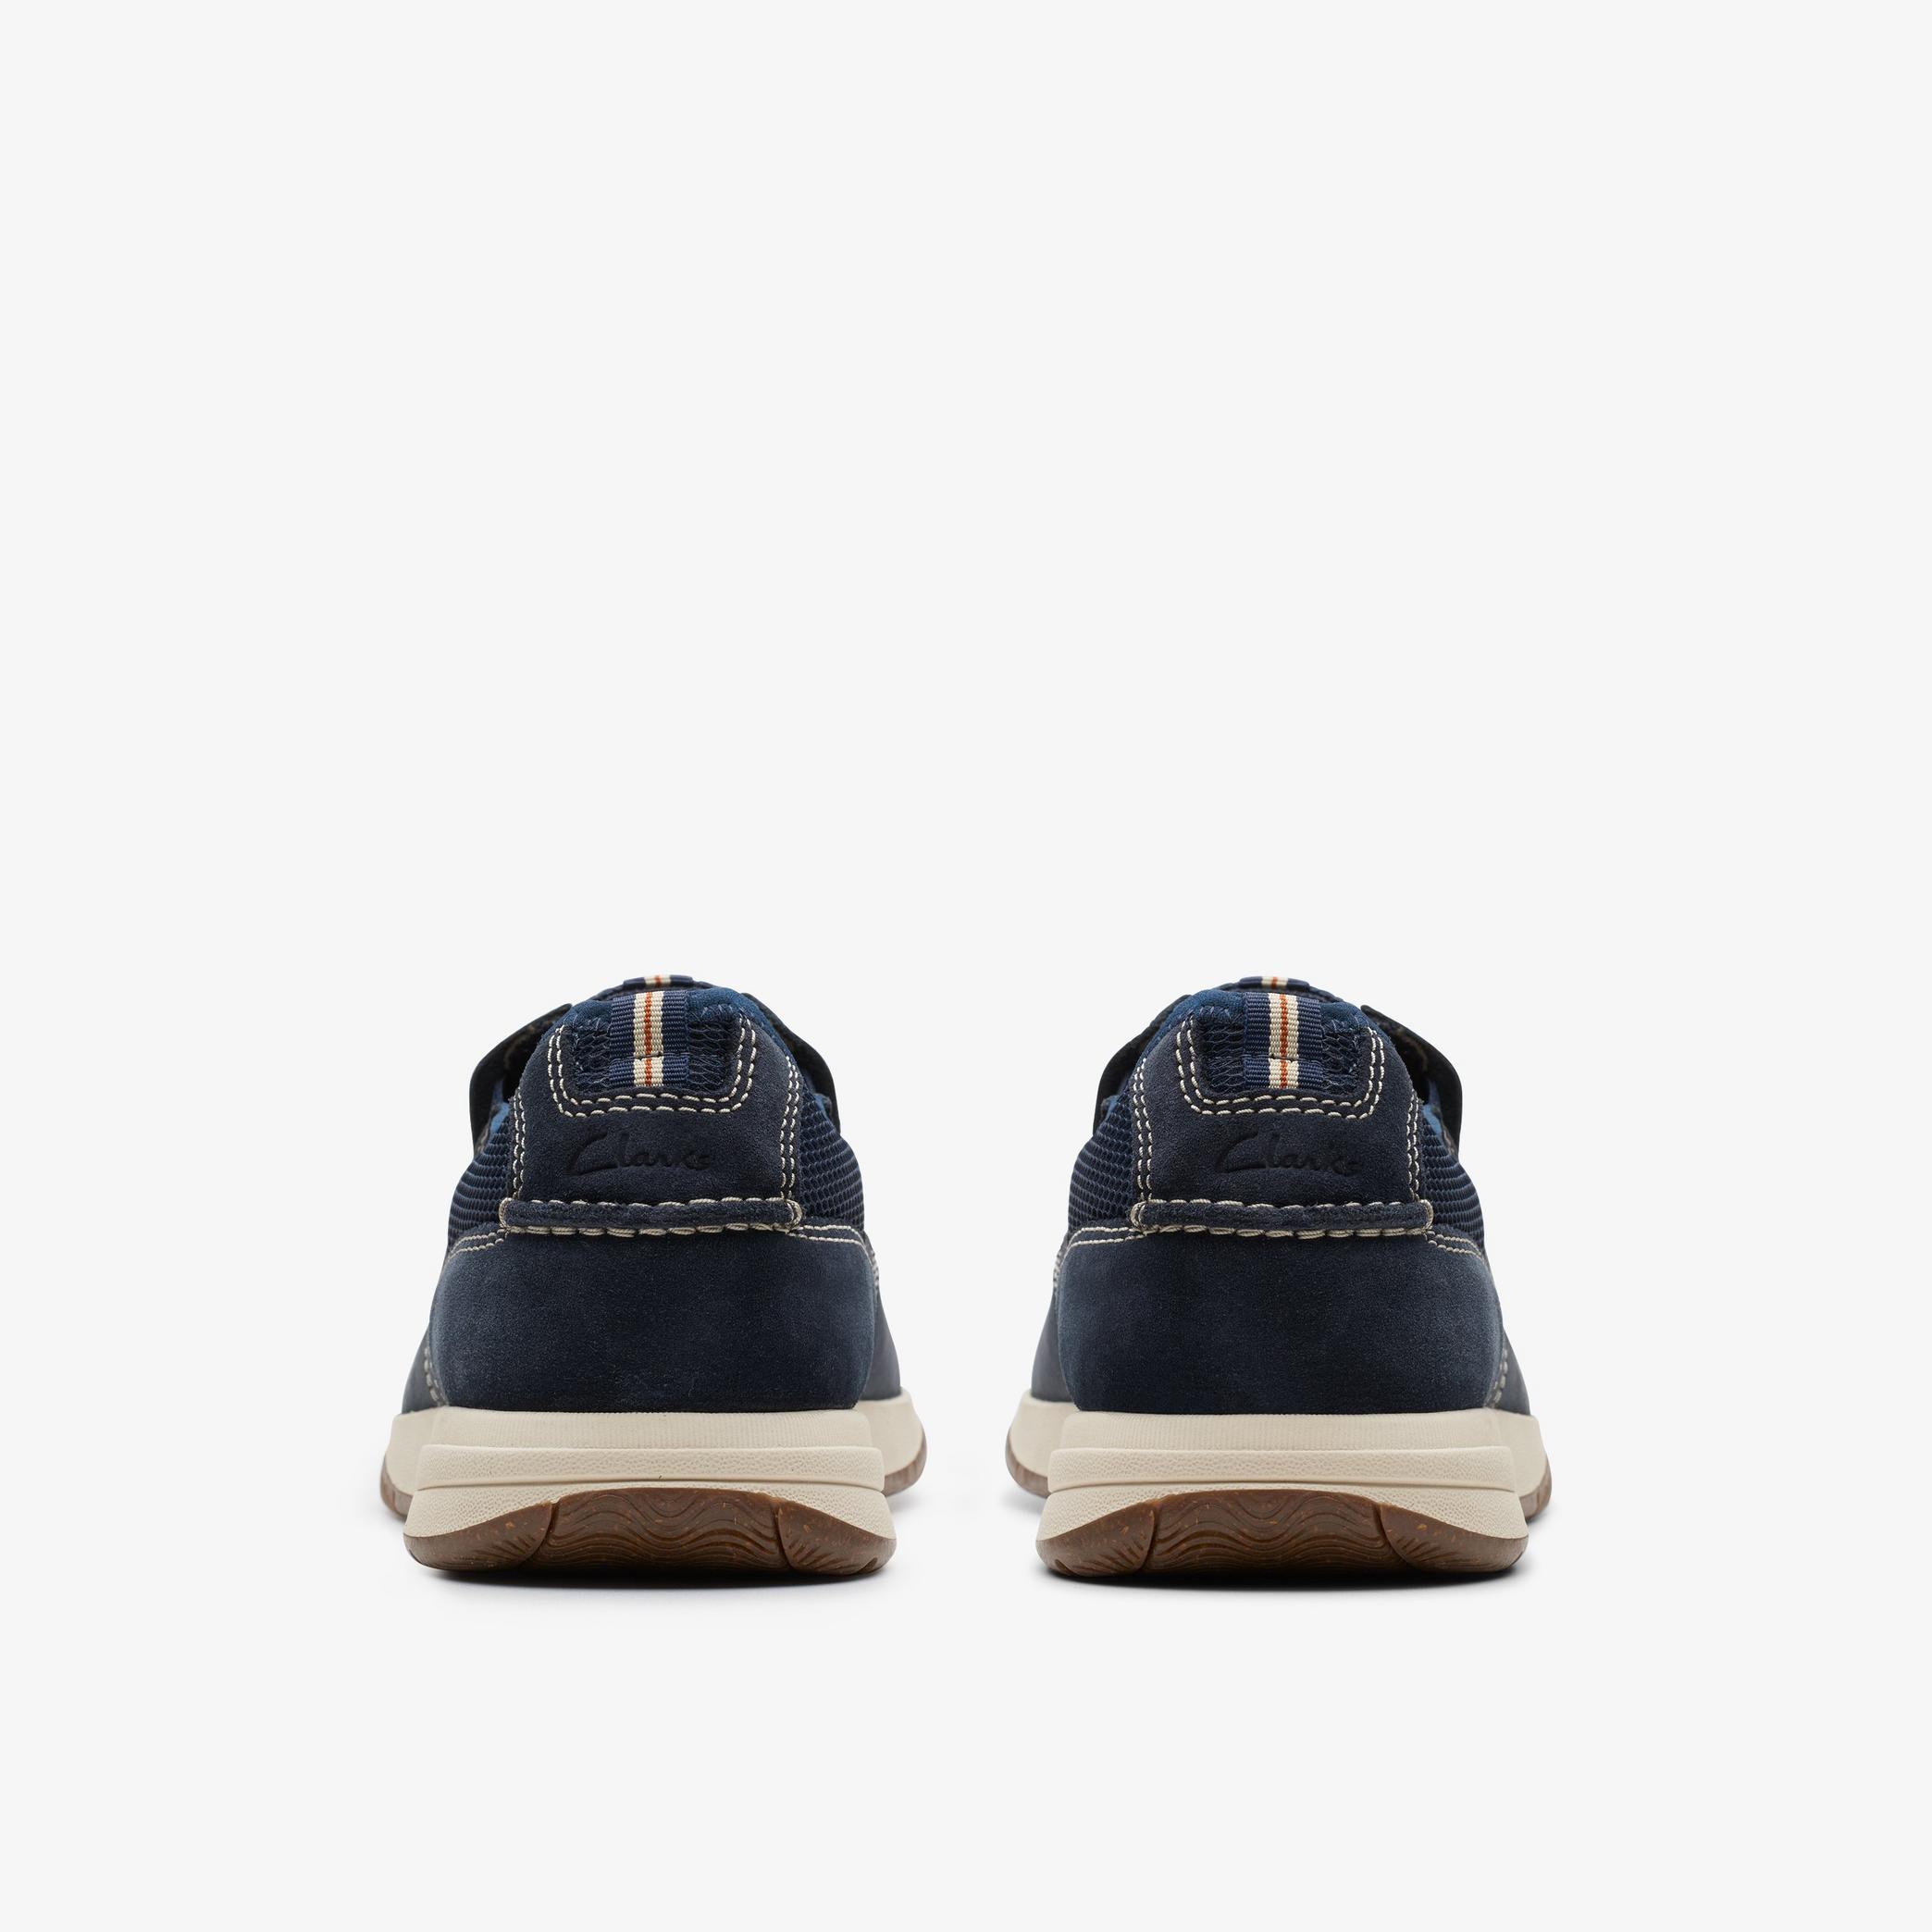 Sailview Step Navy Nubuck Boat Shoes, view 5 of 6